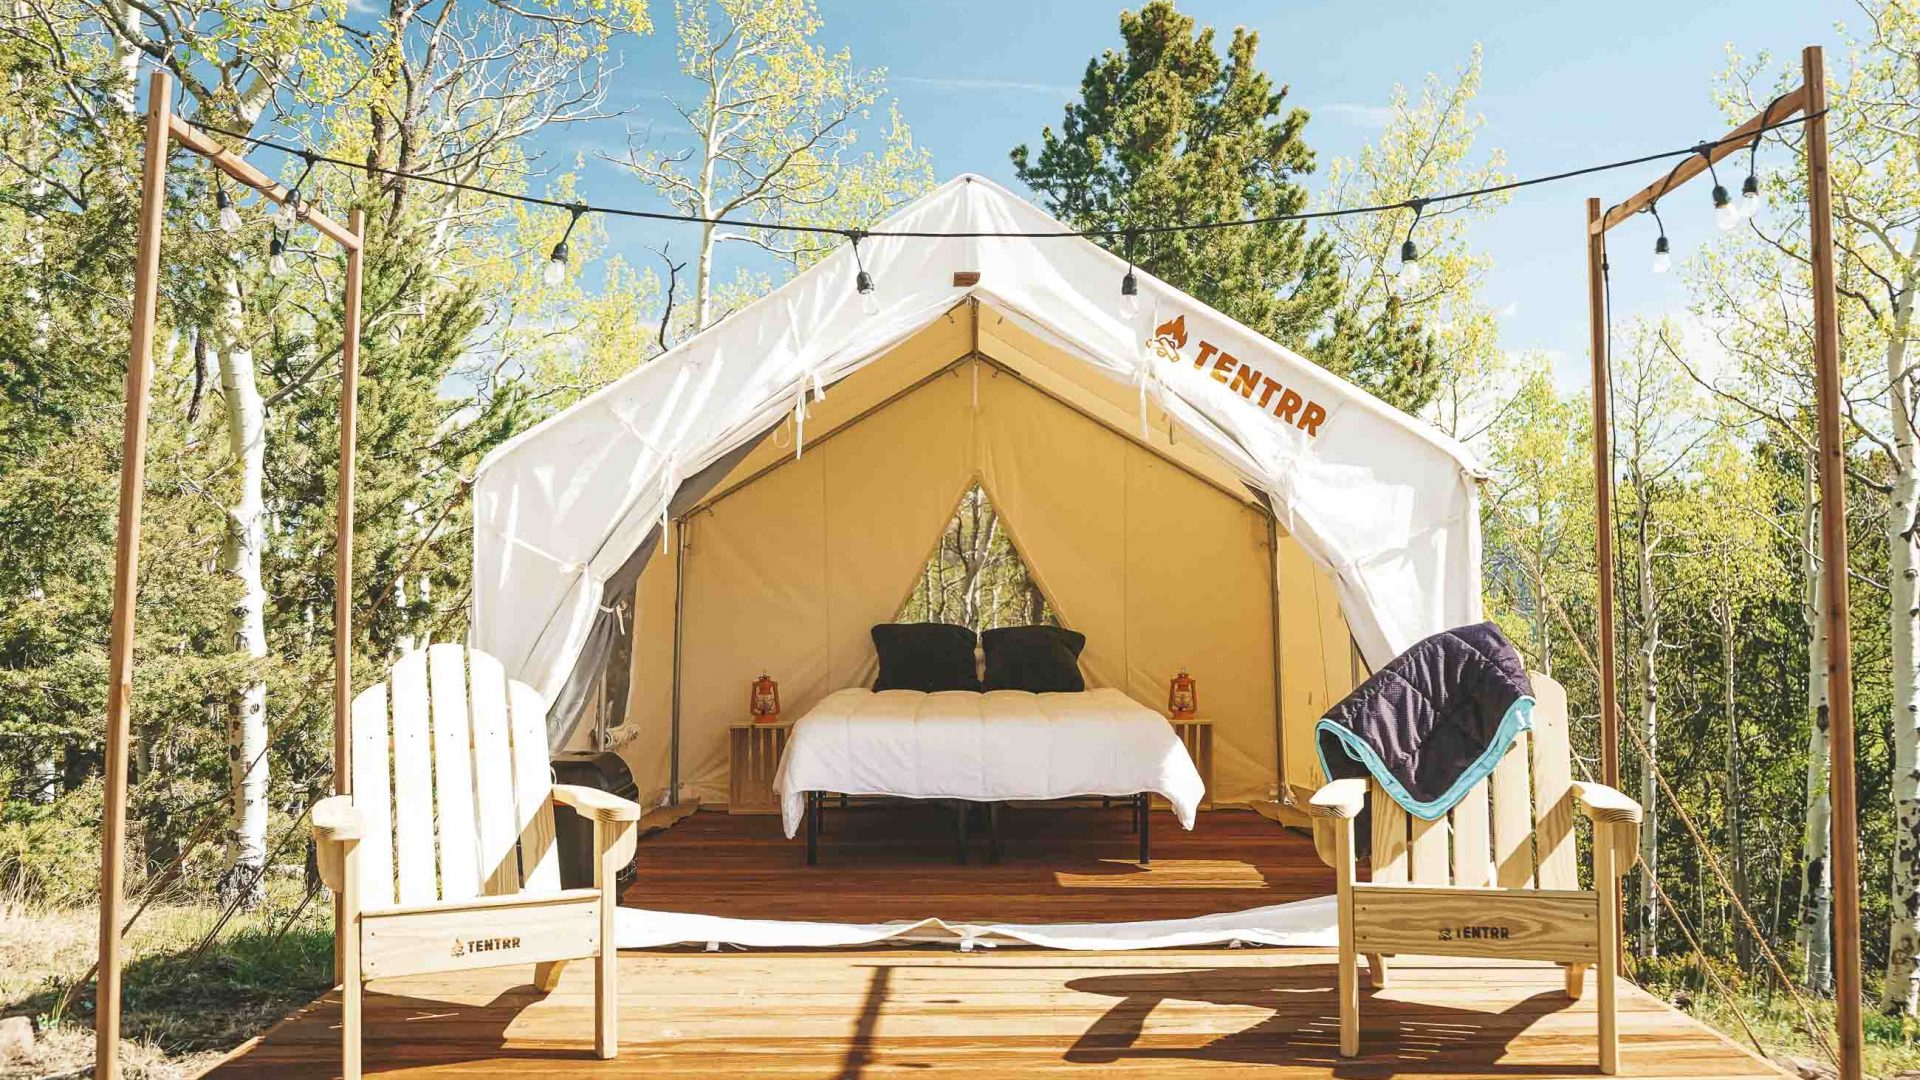 The open flaps of a tent reveal a double bed inside.